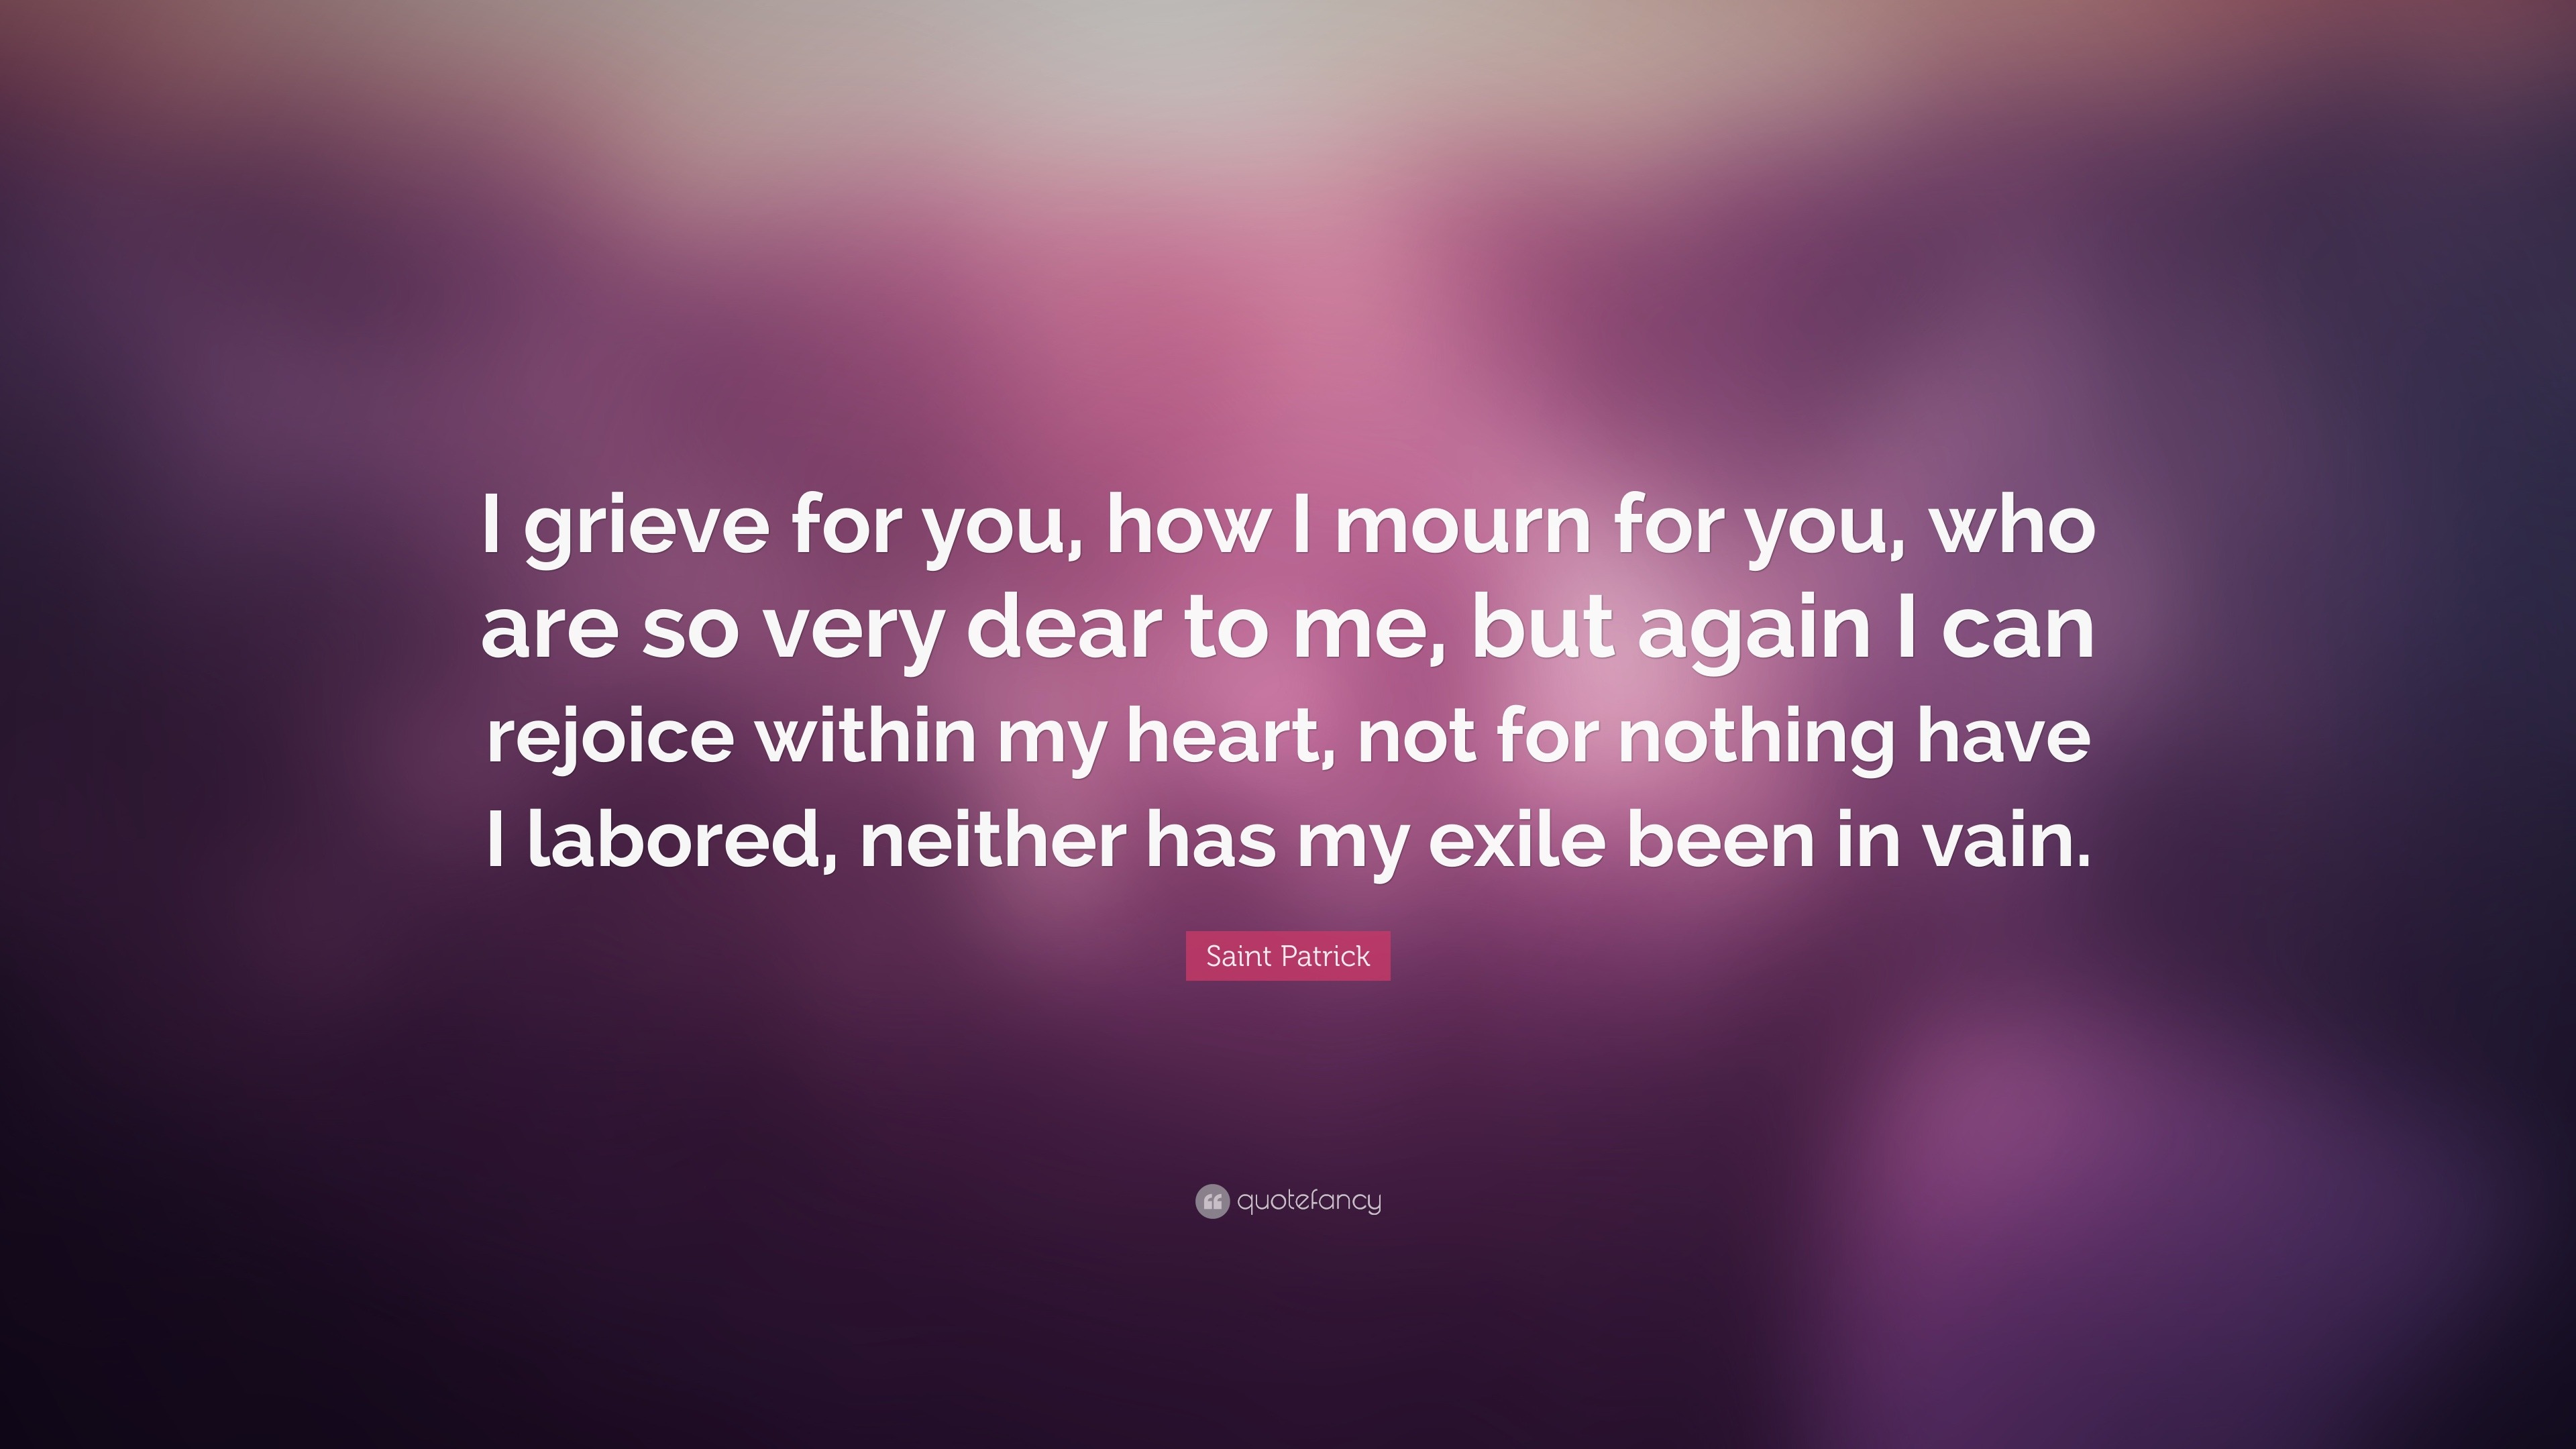 Saint Patrick Quote: “I grieve for you, how I mourn for you, who are so ...